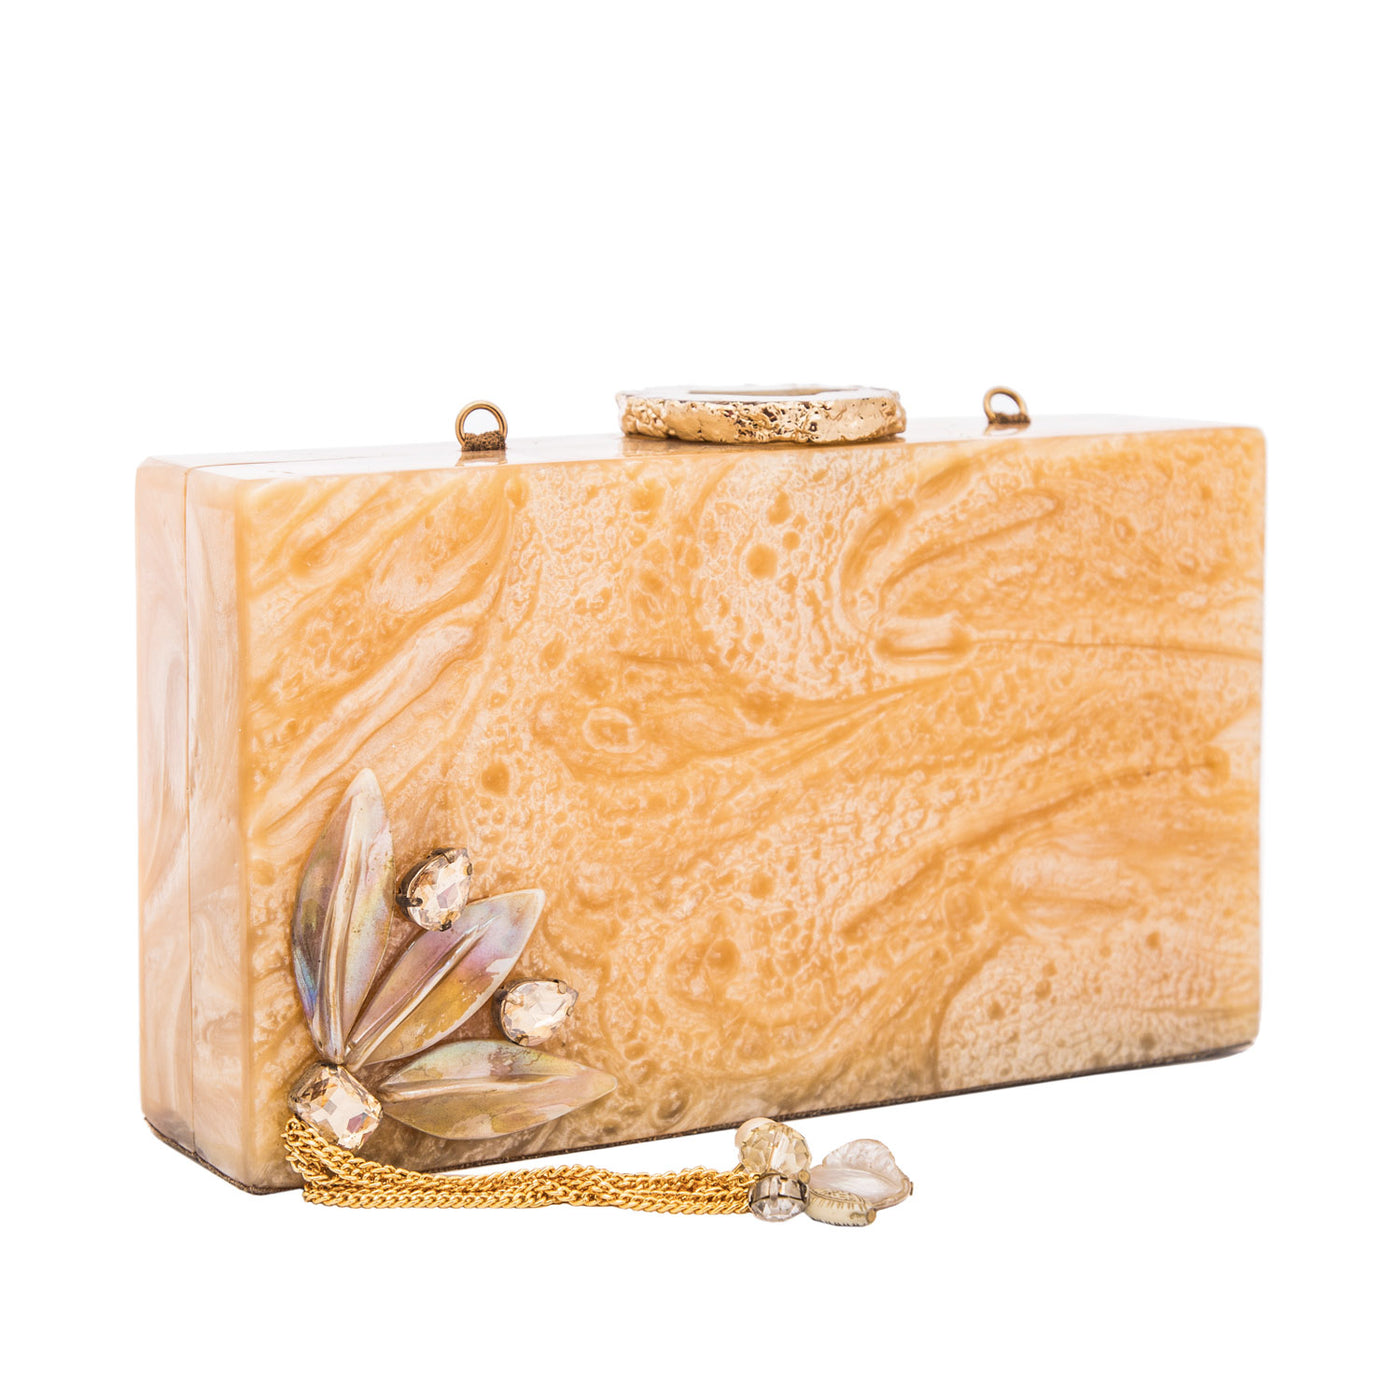 Handcrafted Luxury Clutches UAE